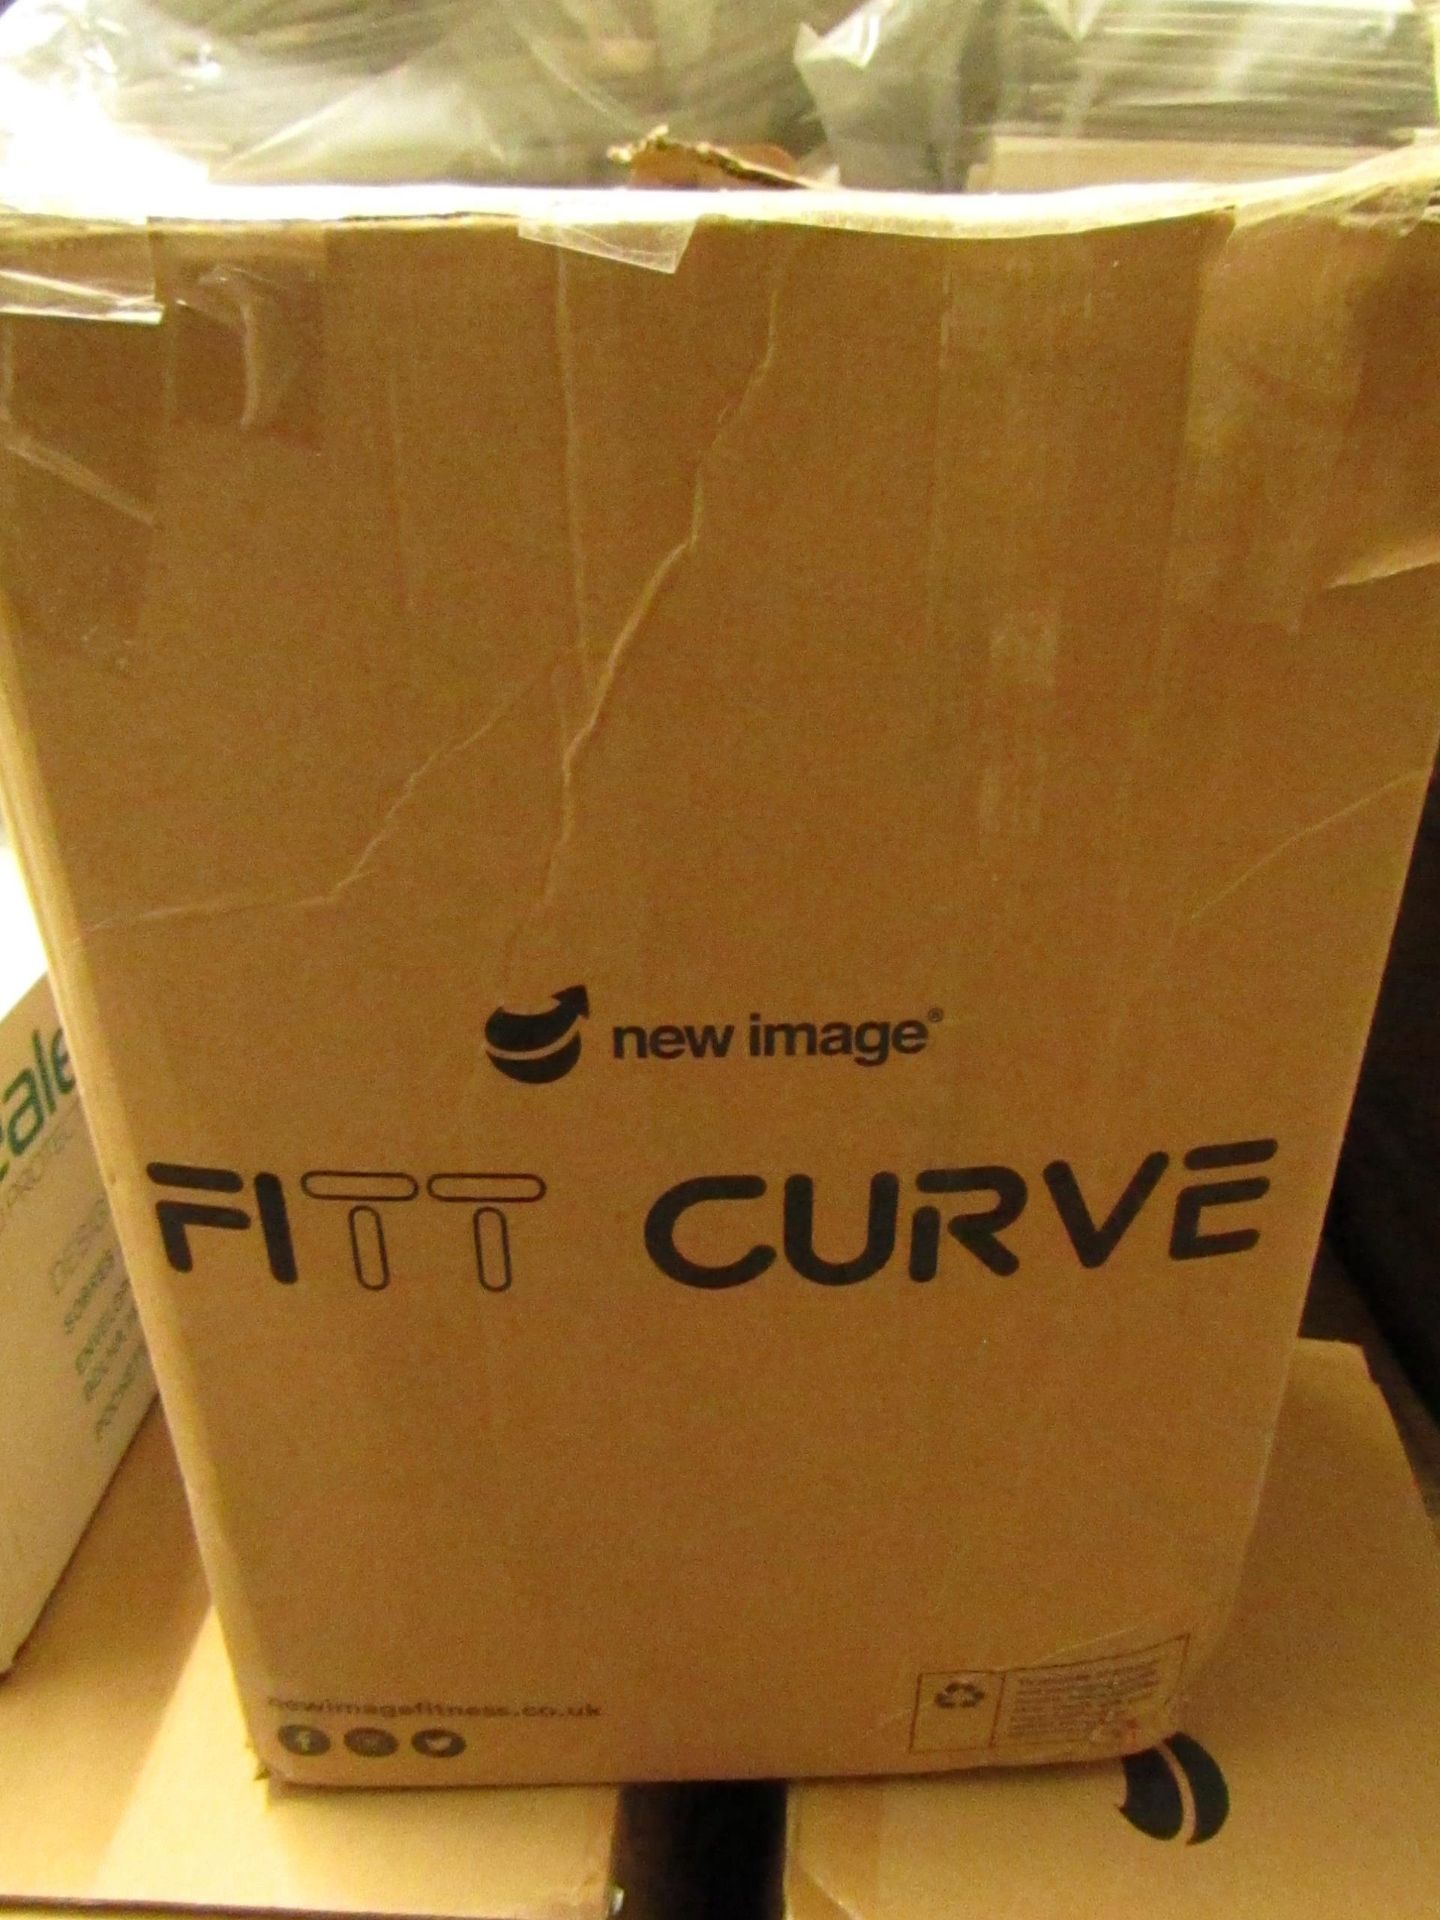 |1x | NEW IMAGE FITT CURVE | NO ONLINE RESALE | UNCHECKED & BOXED | SKU 5060784670047 | RRP £39.